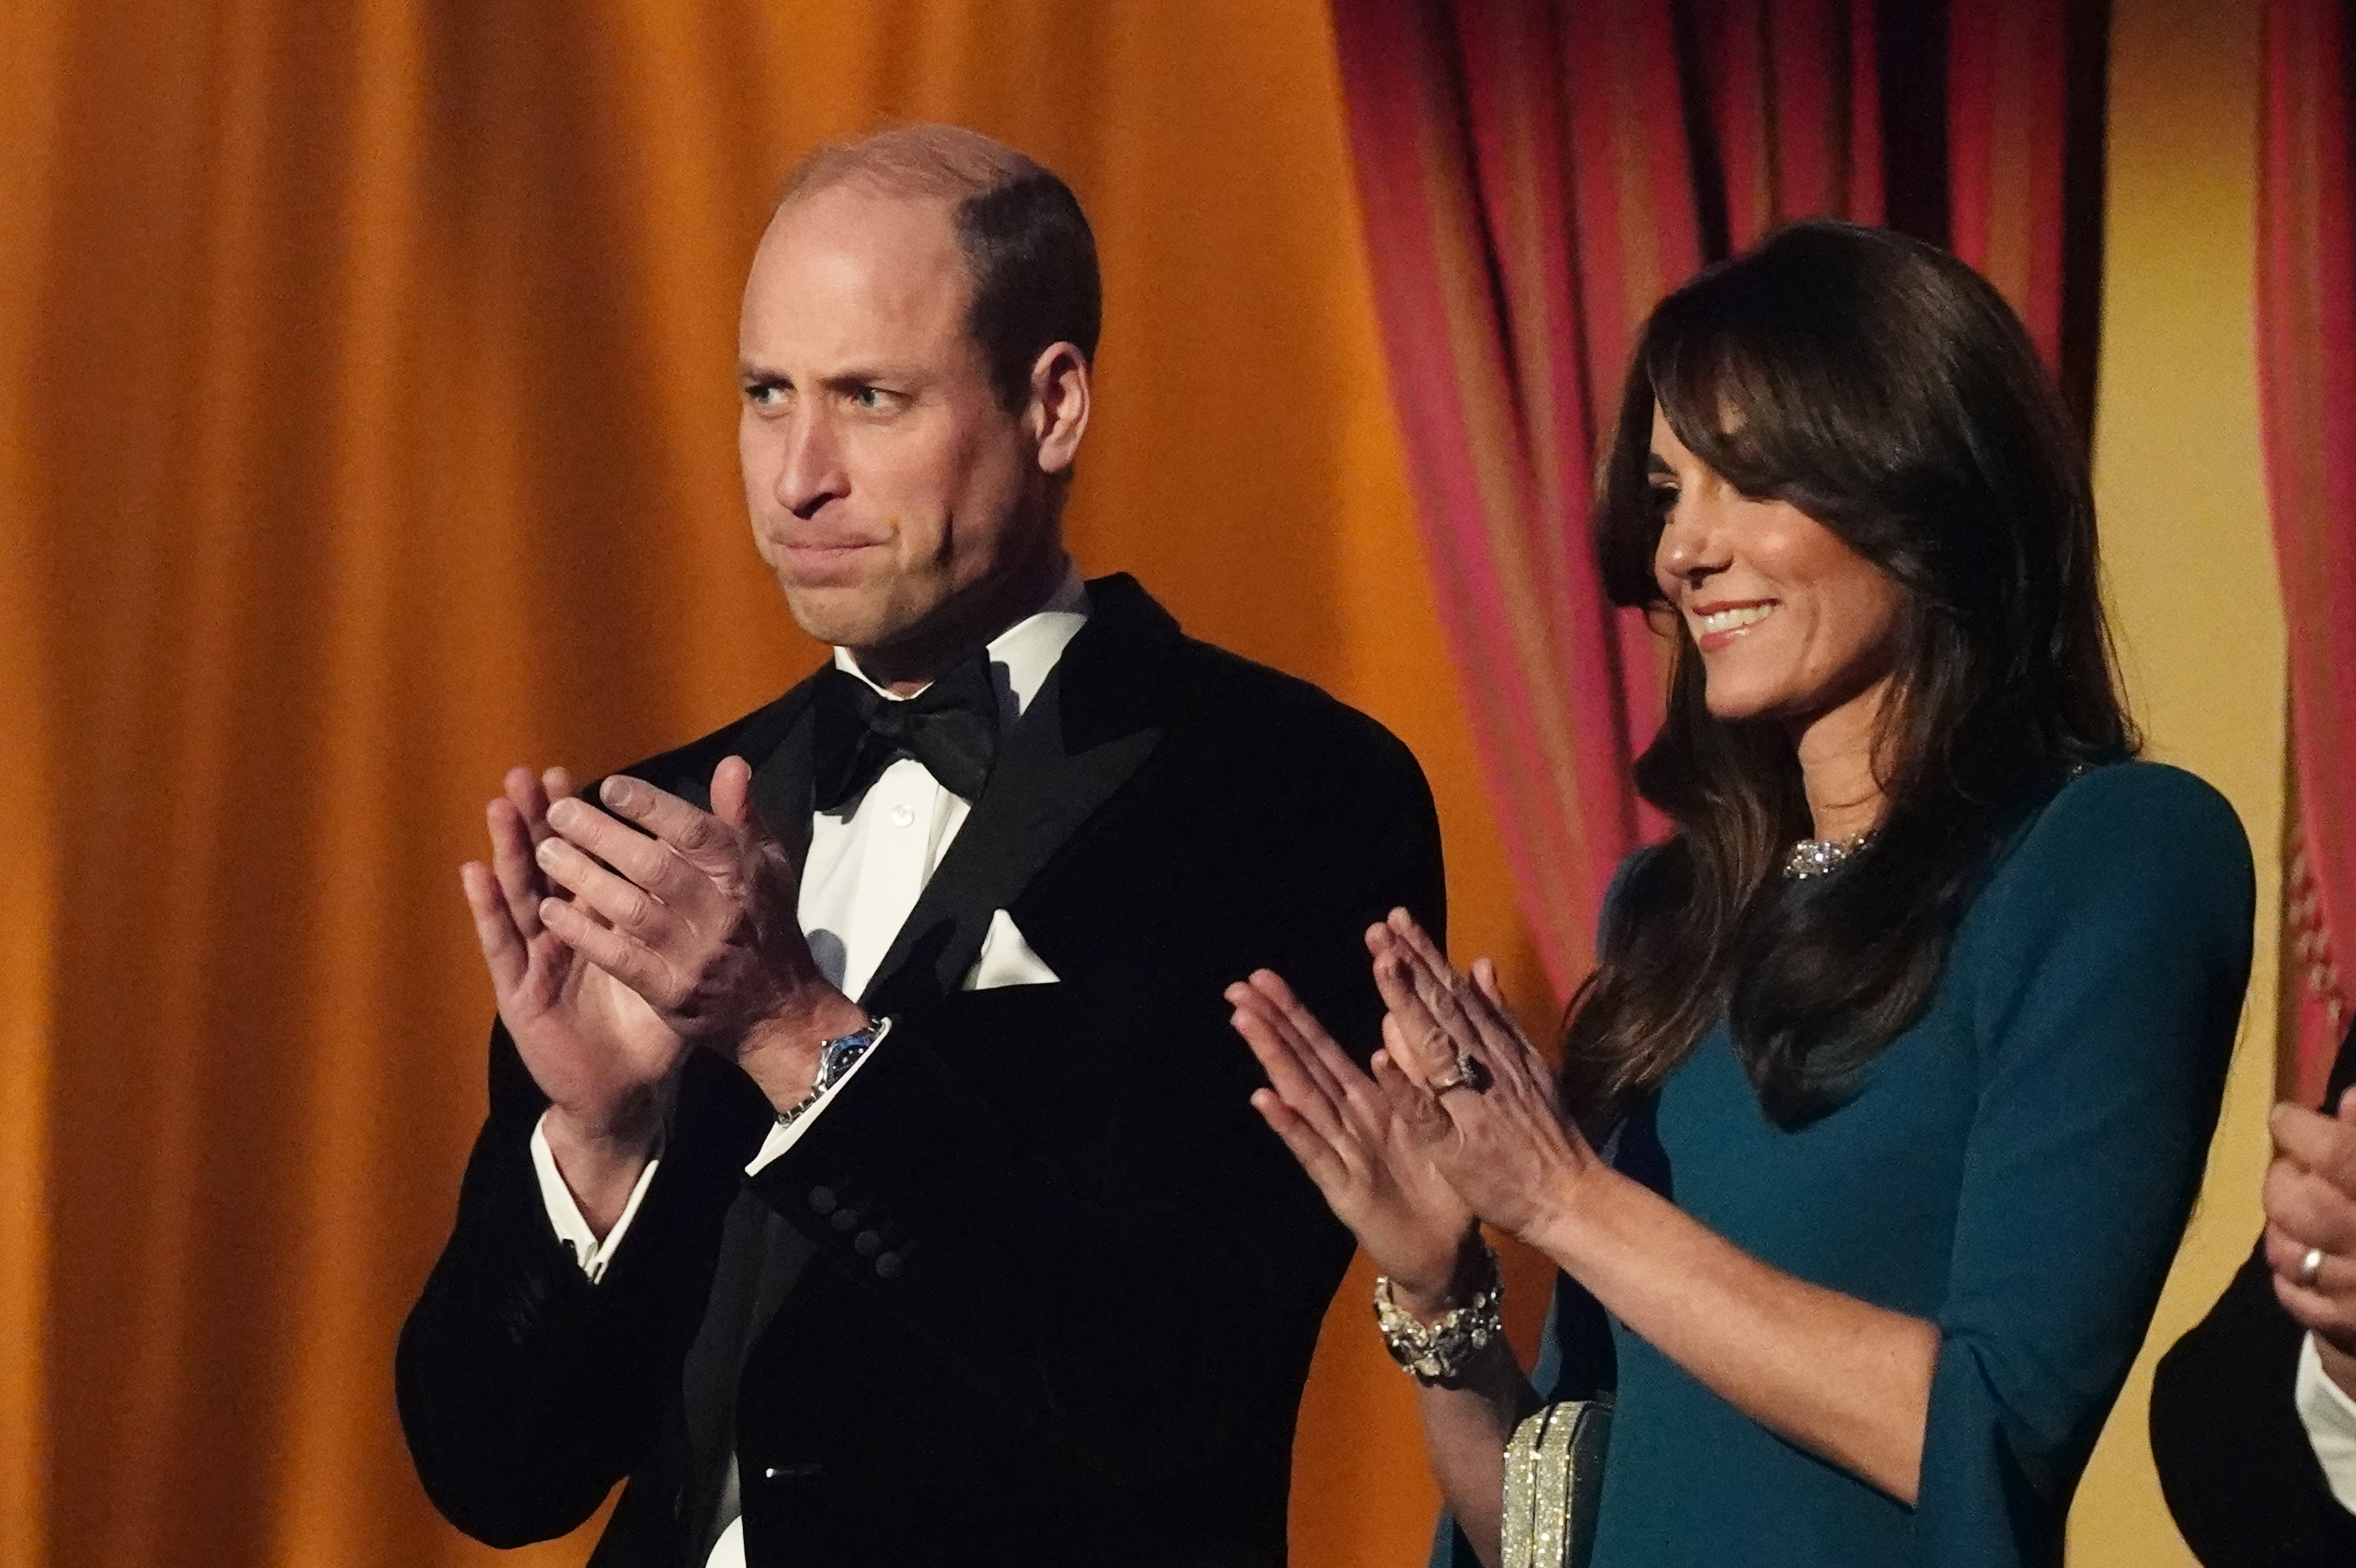 Prince William and Princess Catherine at The Royal Variety Performance in London, England on November 30, 2023 | Source: Getty Images